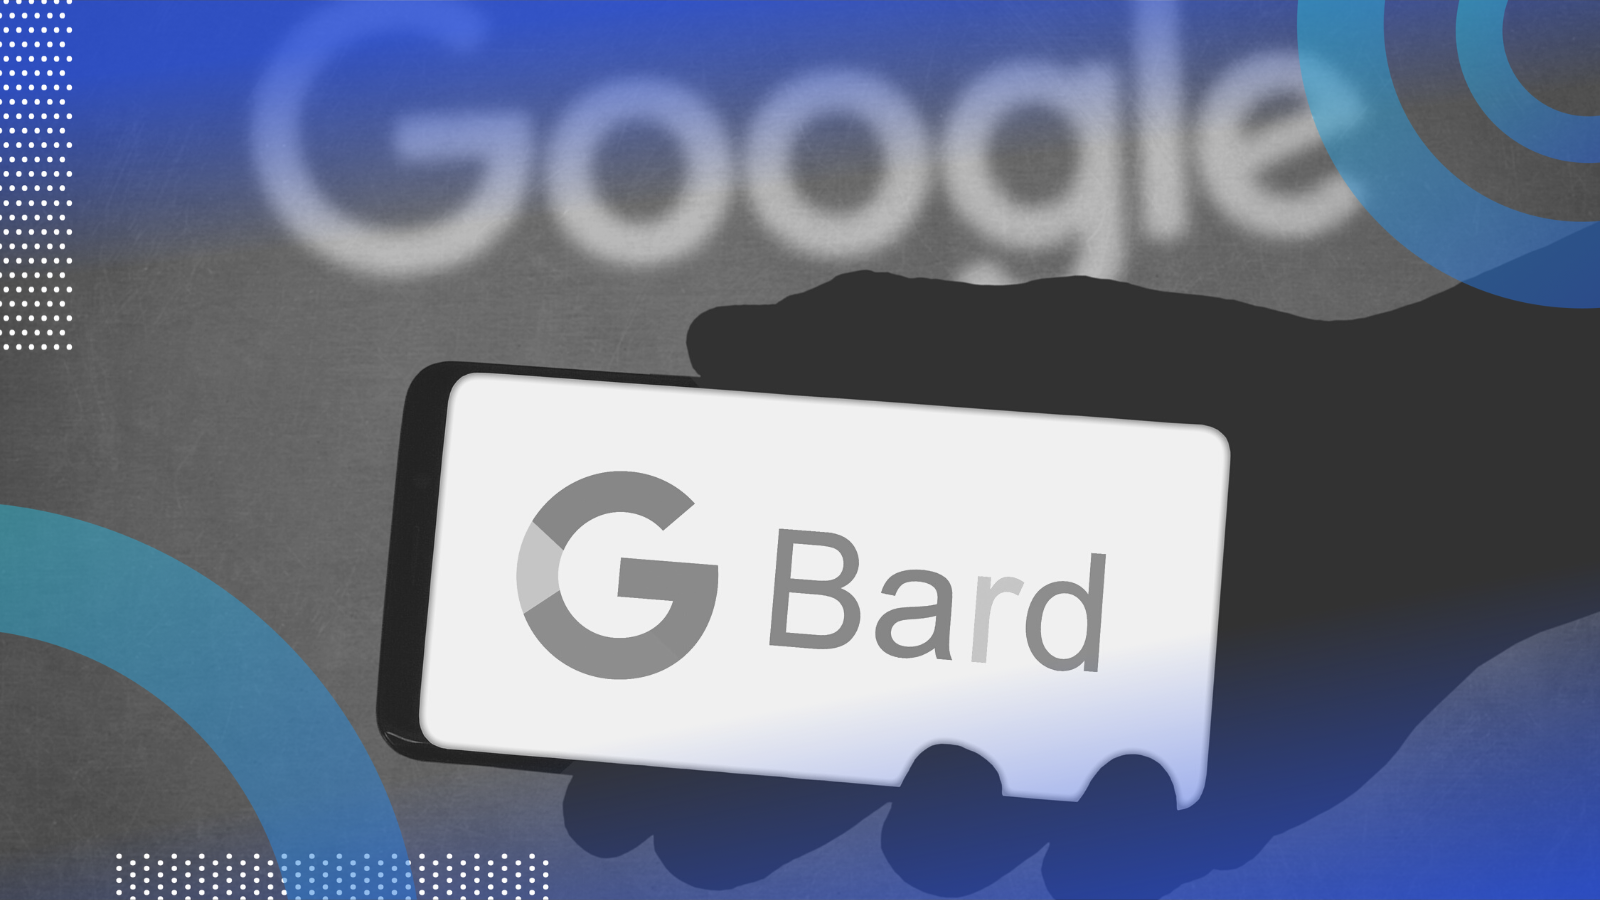 What Is Google Bard?